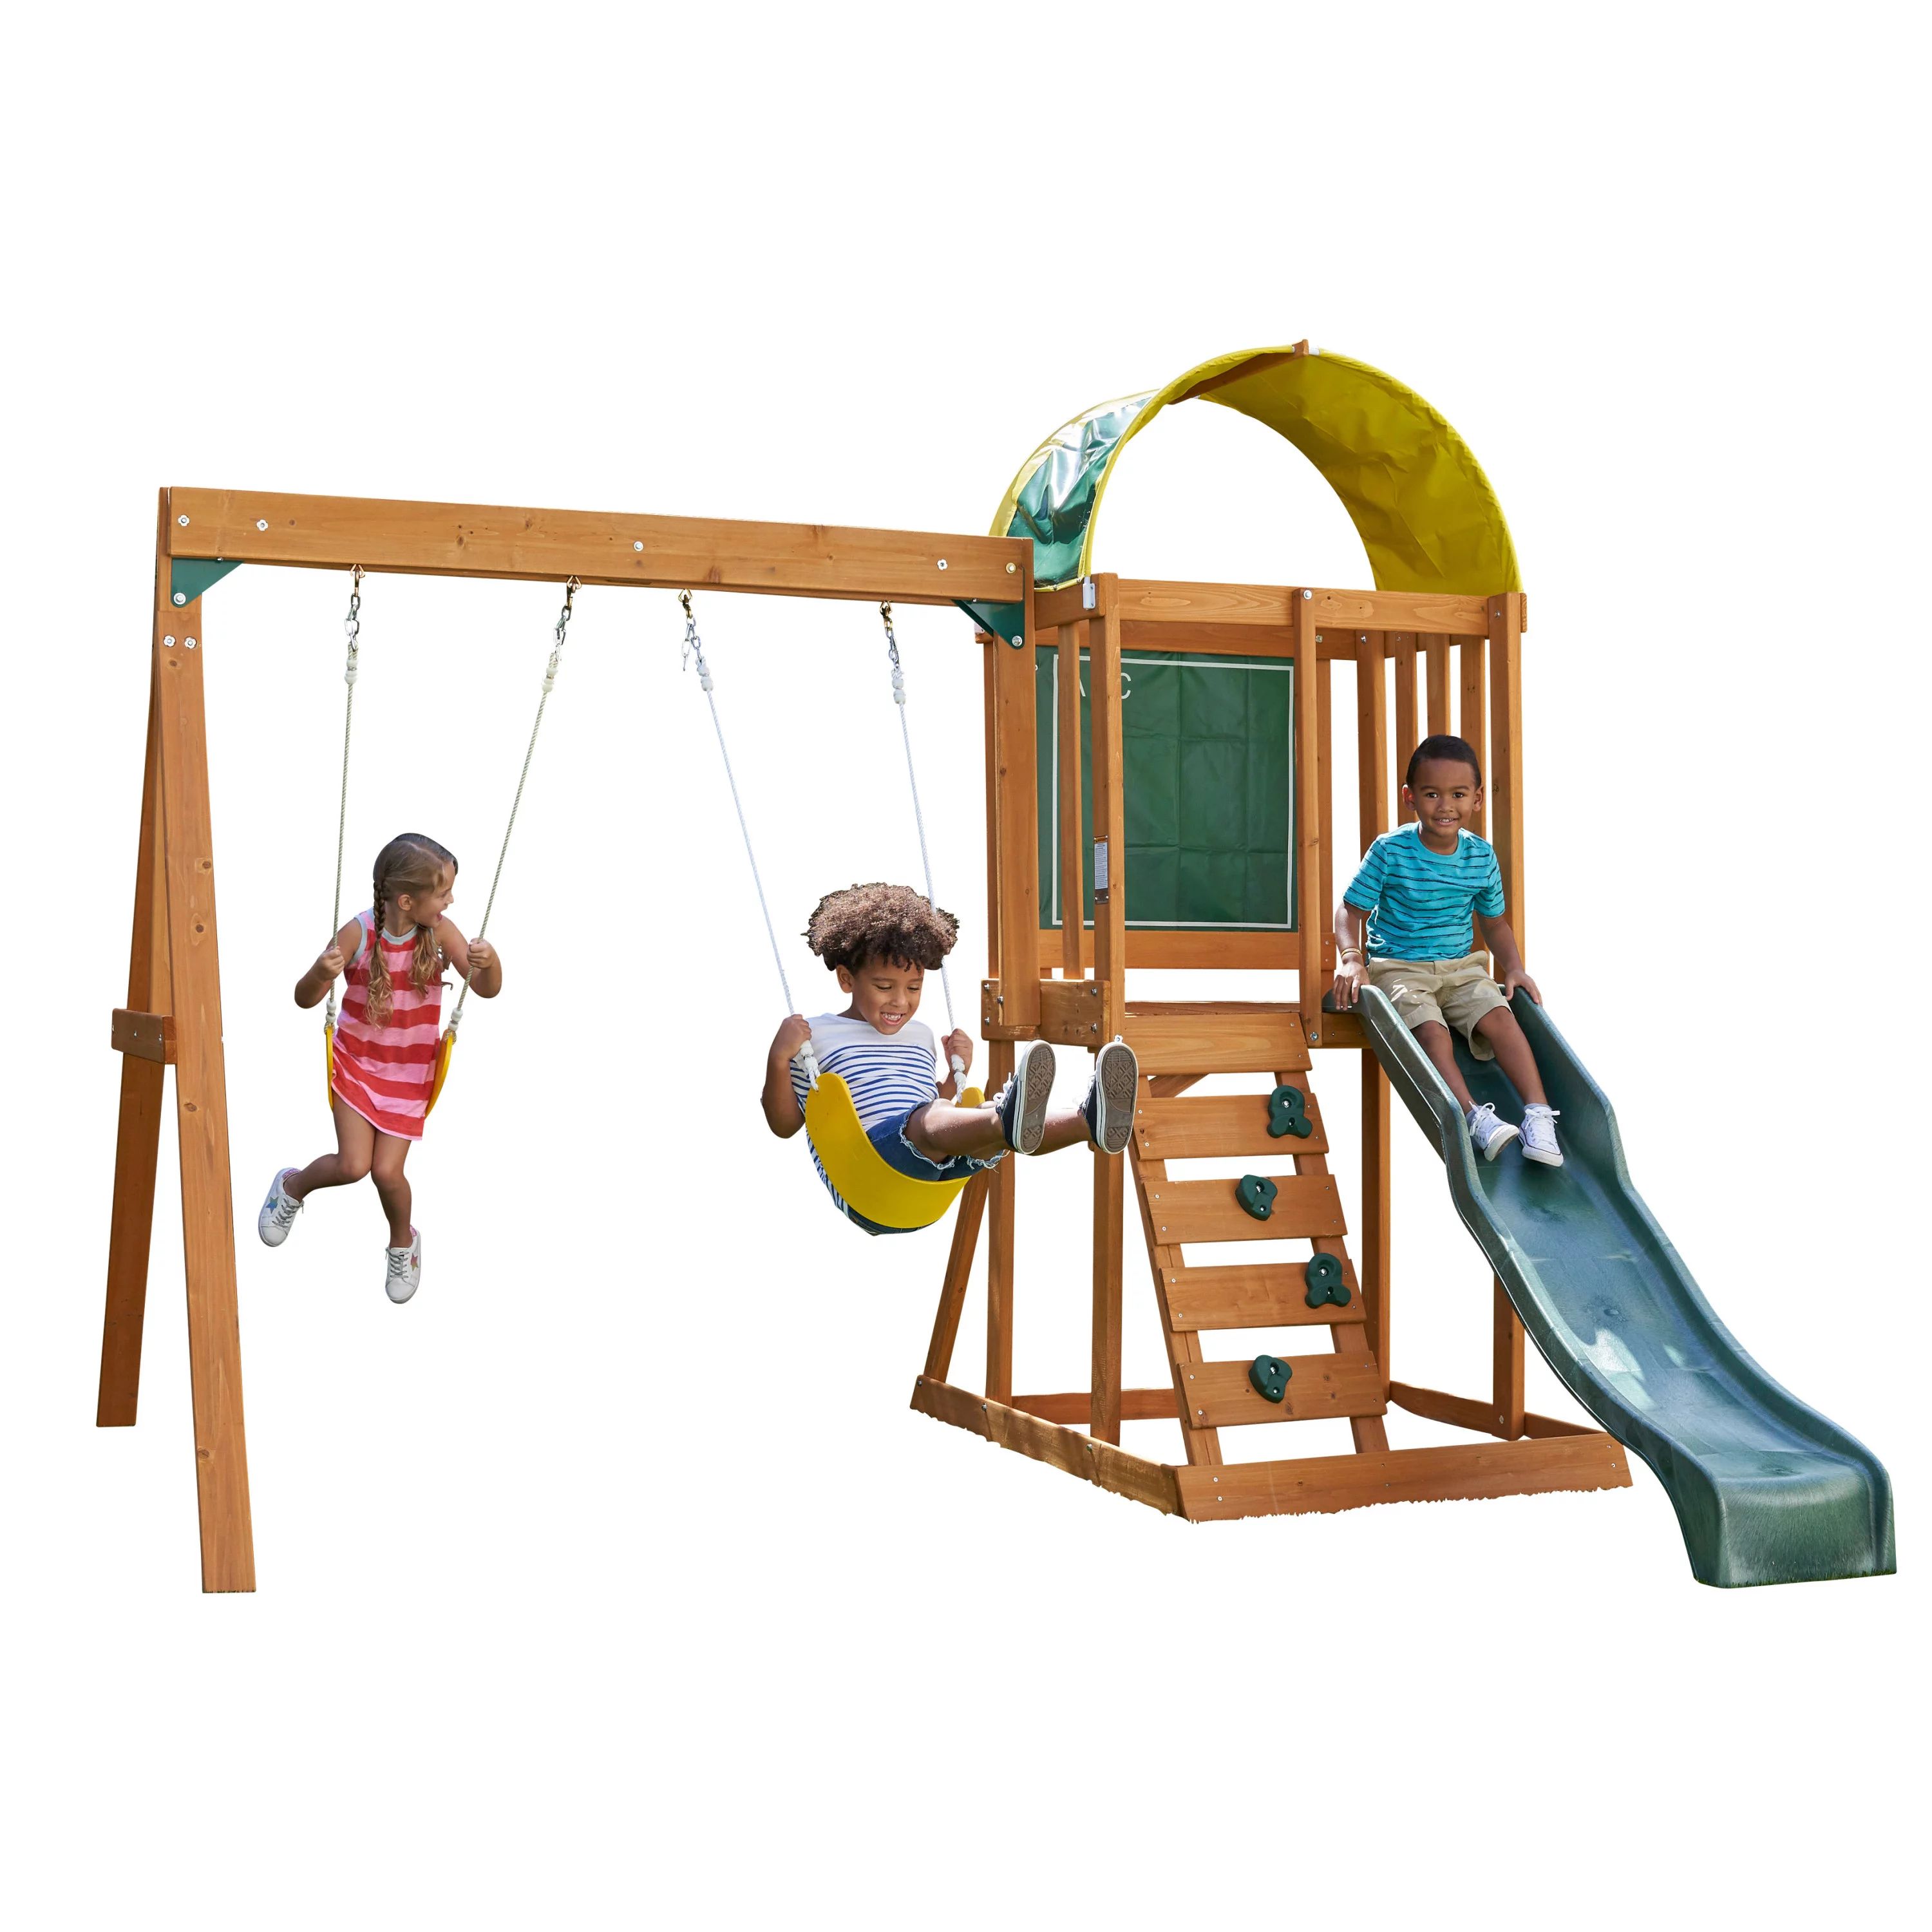 KidKraft Ainsley Wooden Outdoor Swing Set / Playset with Slide, Chalk Wall, Canopy and Rock Wall | Walmart (US)